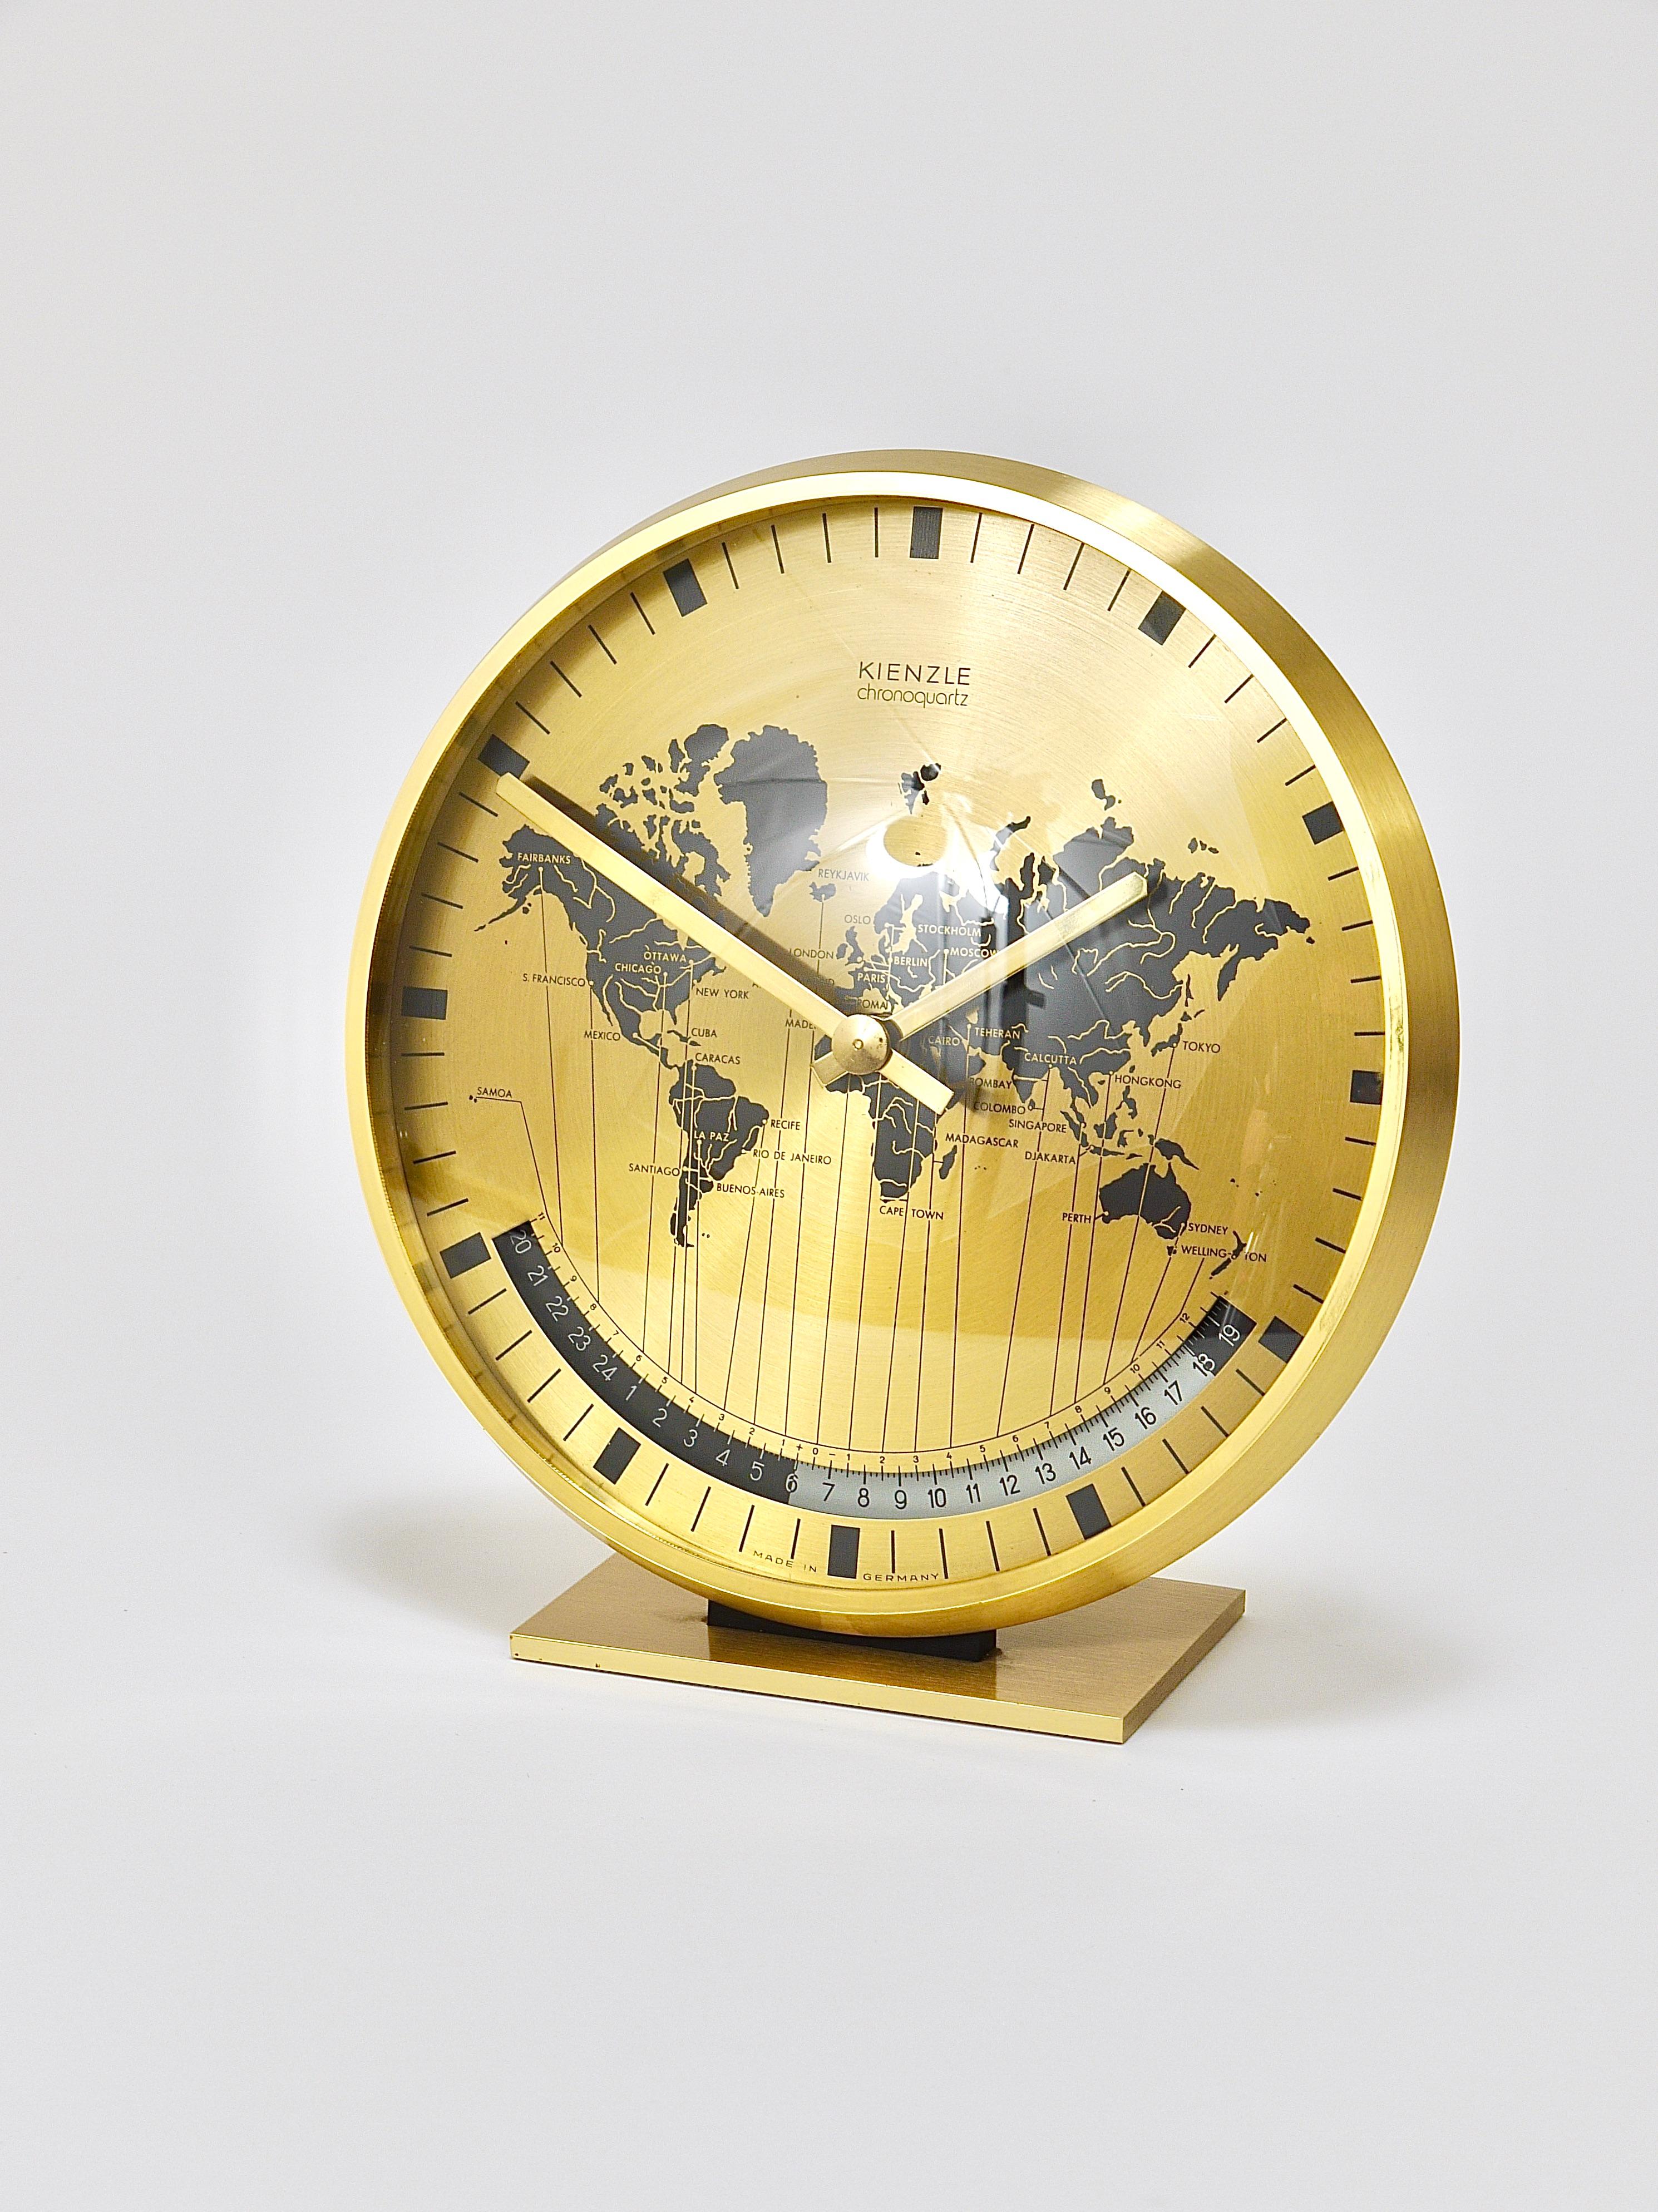 Kienzle GMT World Time Zone Brass Table Clock, Midcentury, Germany, 1960s For Sale 8